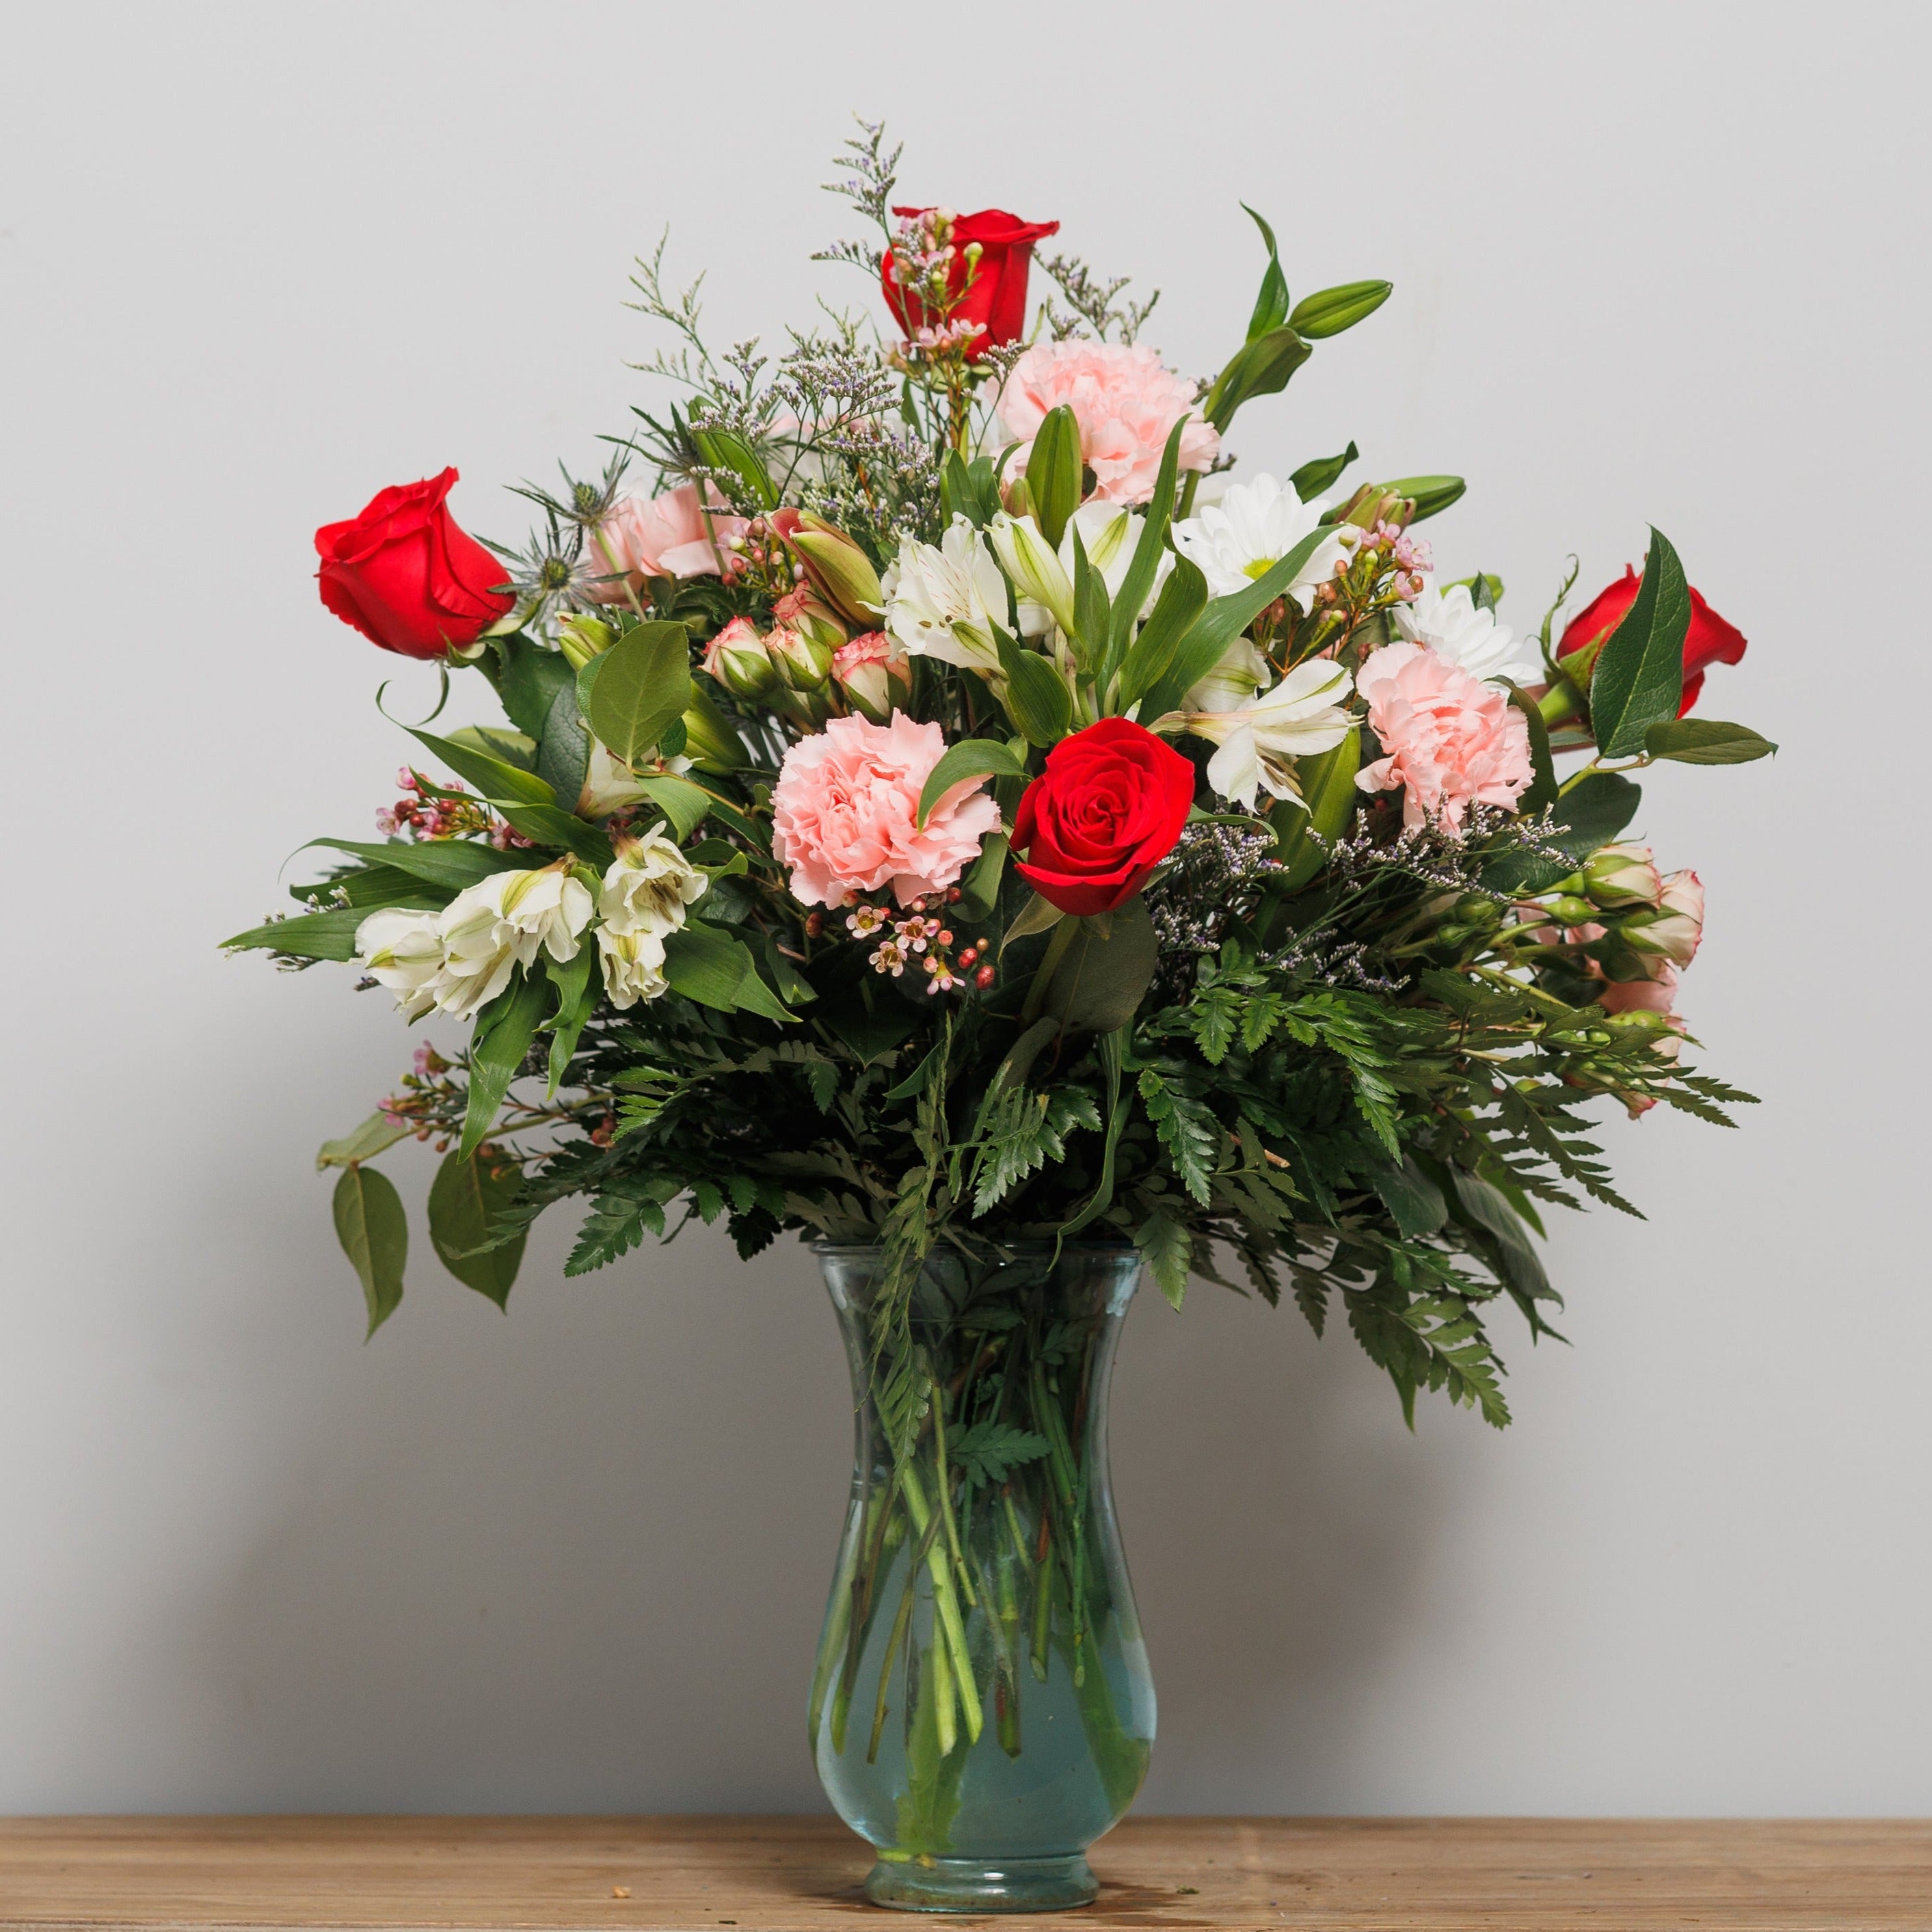 Red roses with pink carnations, lilies and alstroemeria arranged in a vase. 